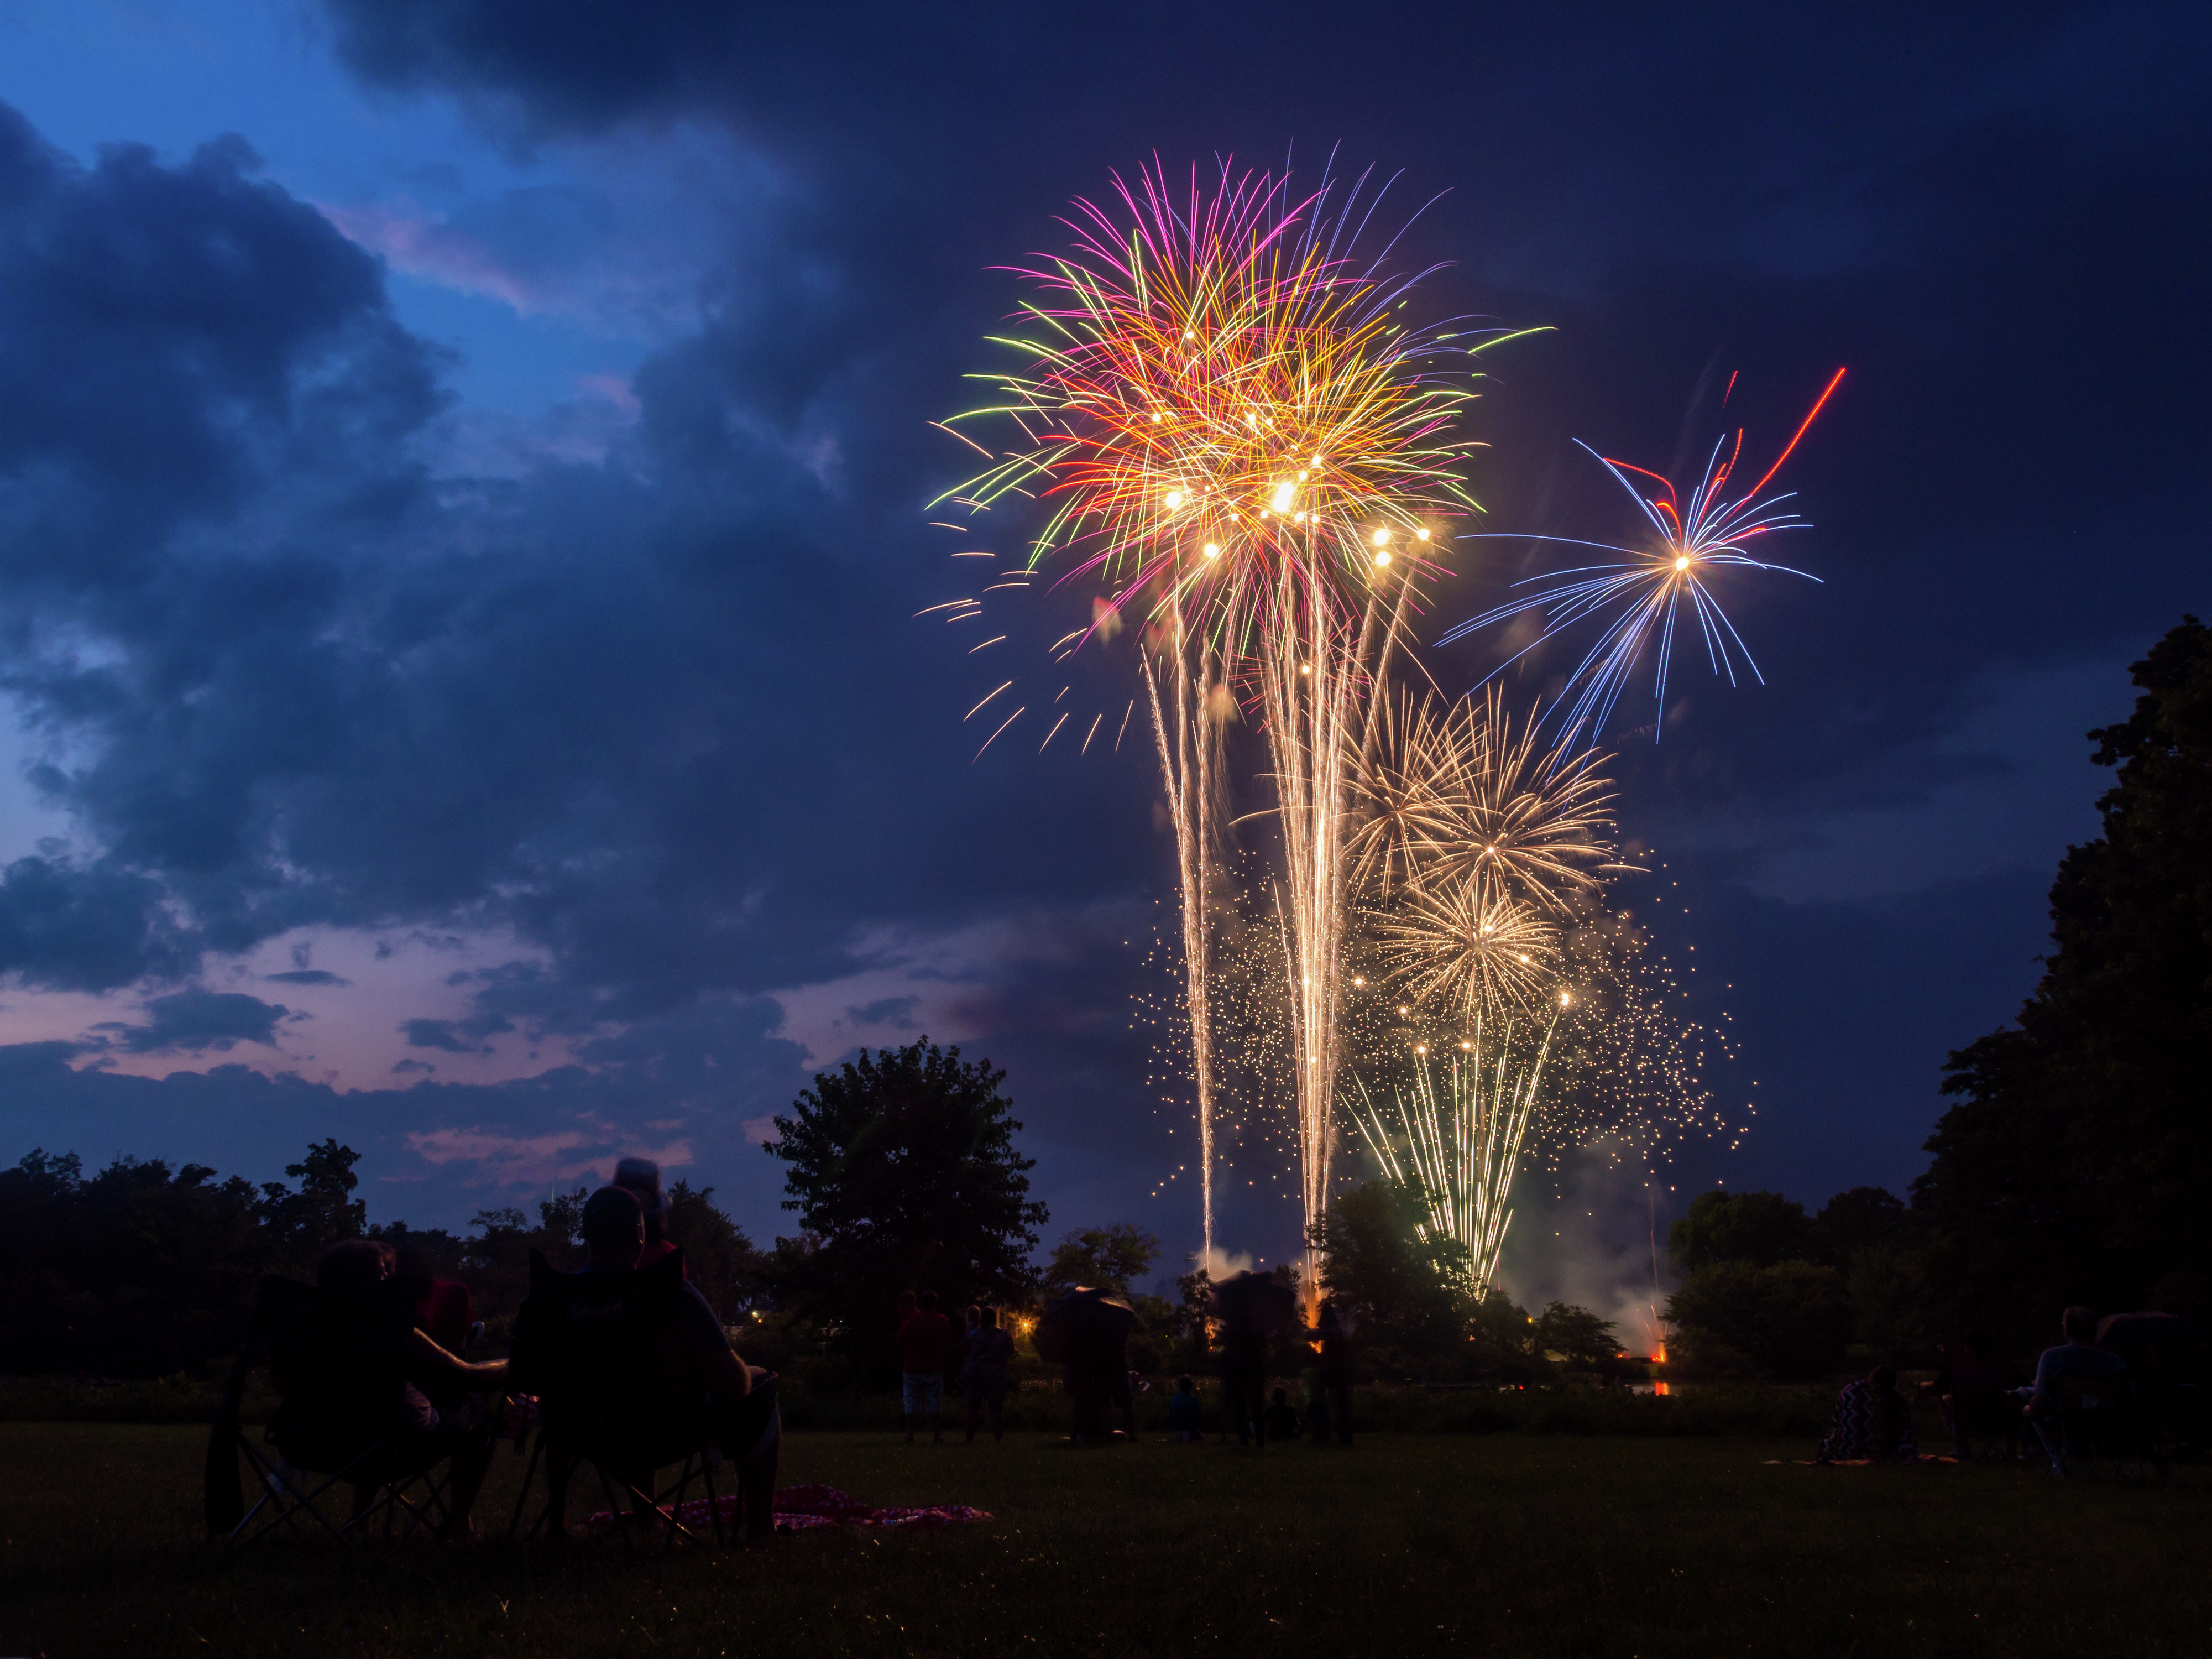 Angela Berti from New York State Parks on fireworks to celebrate the Fourth of July at Niagara Falls State Park